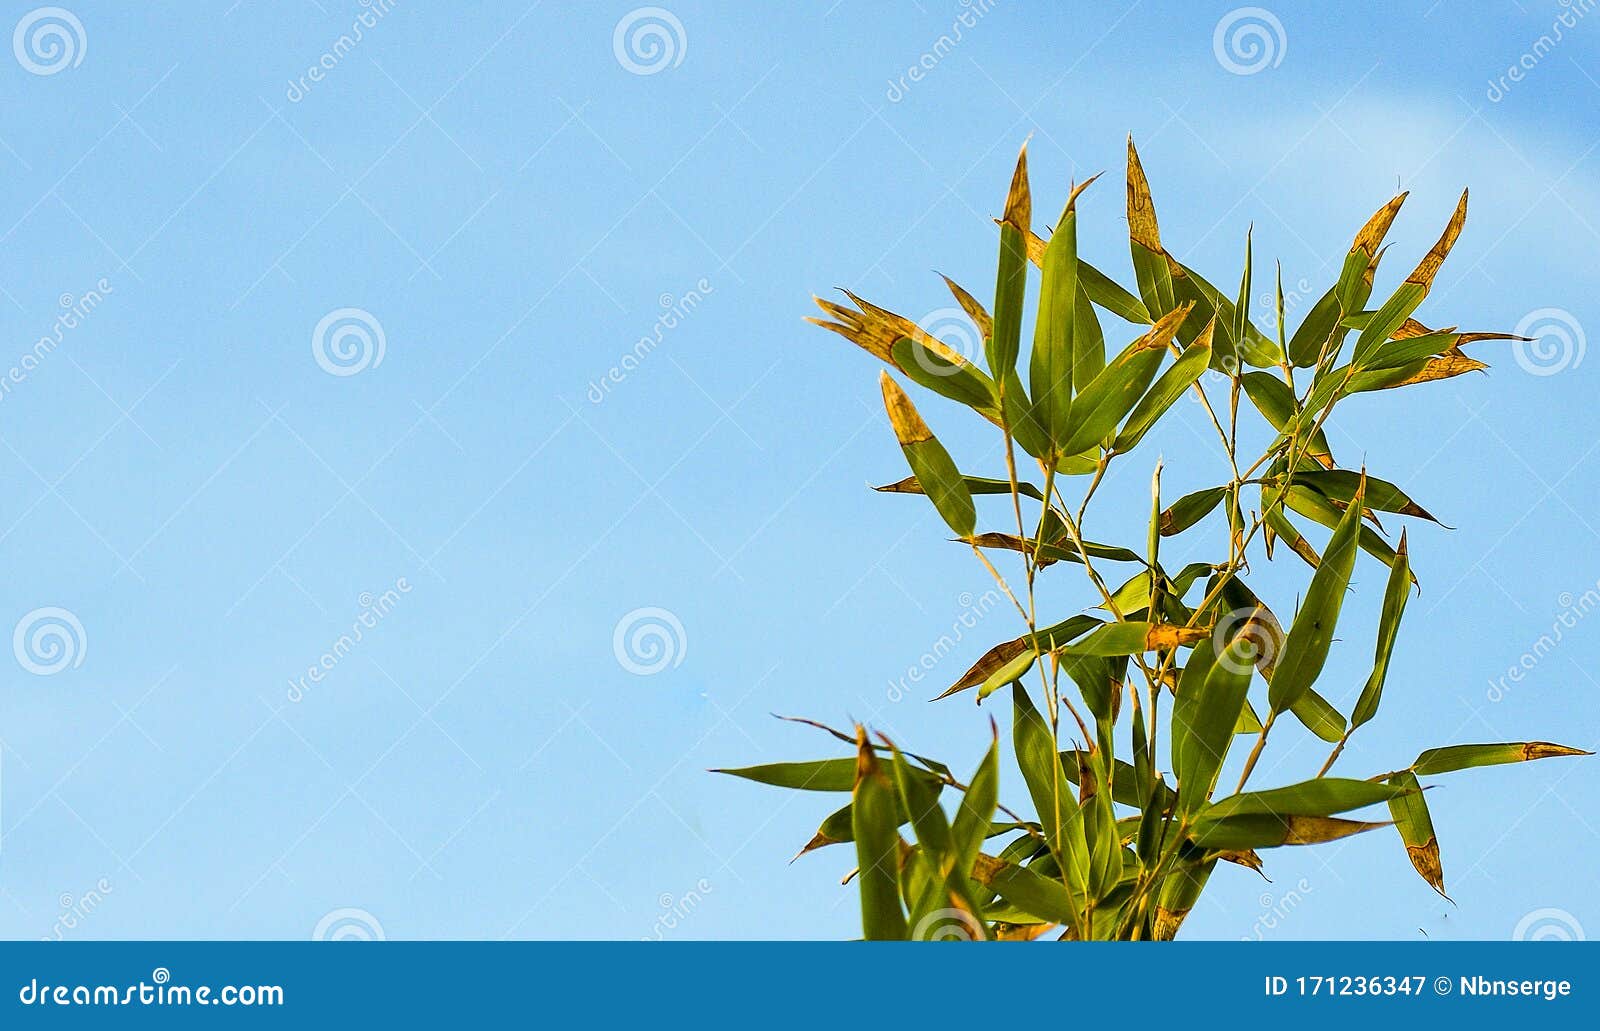 Bamboo Leaves Turning Brown In Winter Against Blue Sky Background Or Wallpaper Stock Image Image Of Growth Background